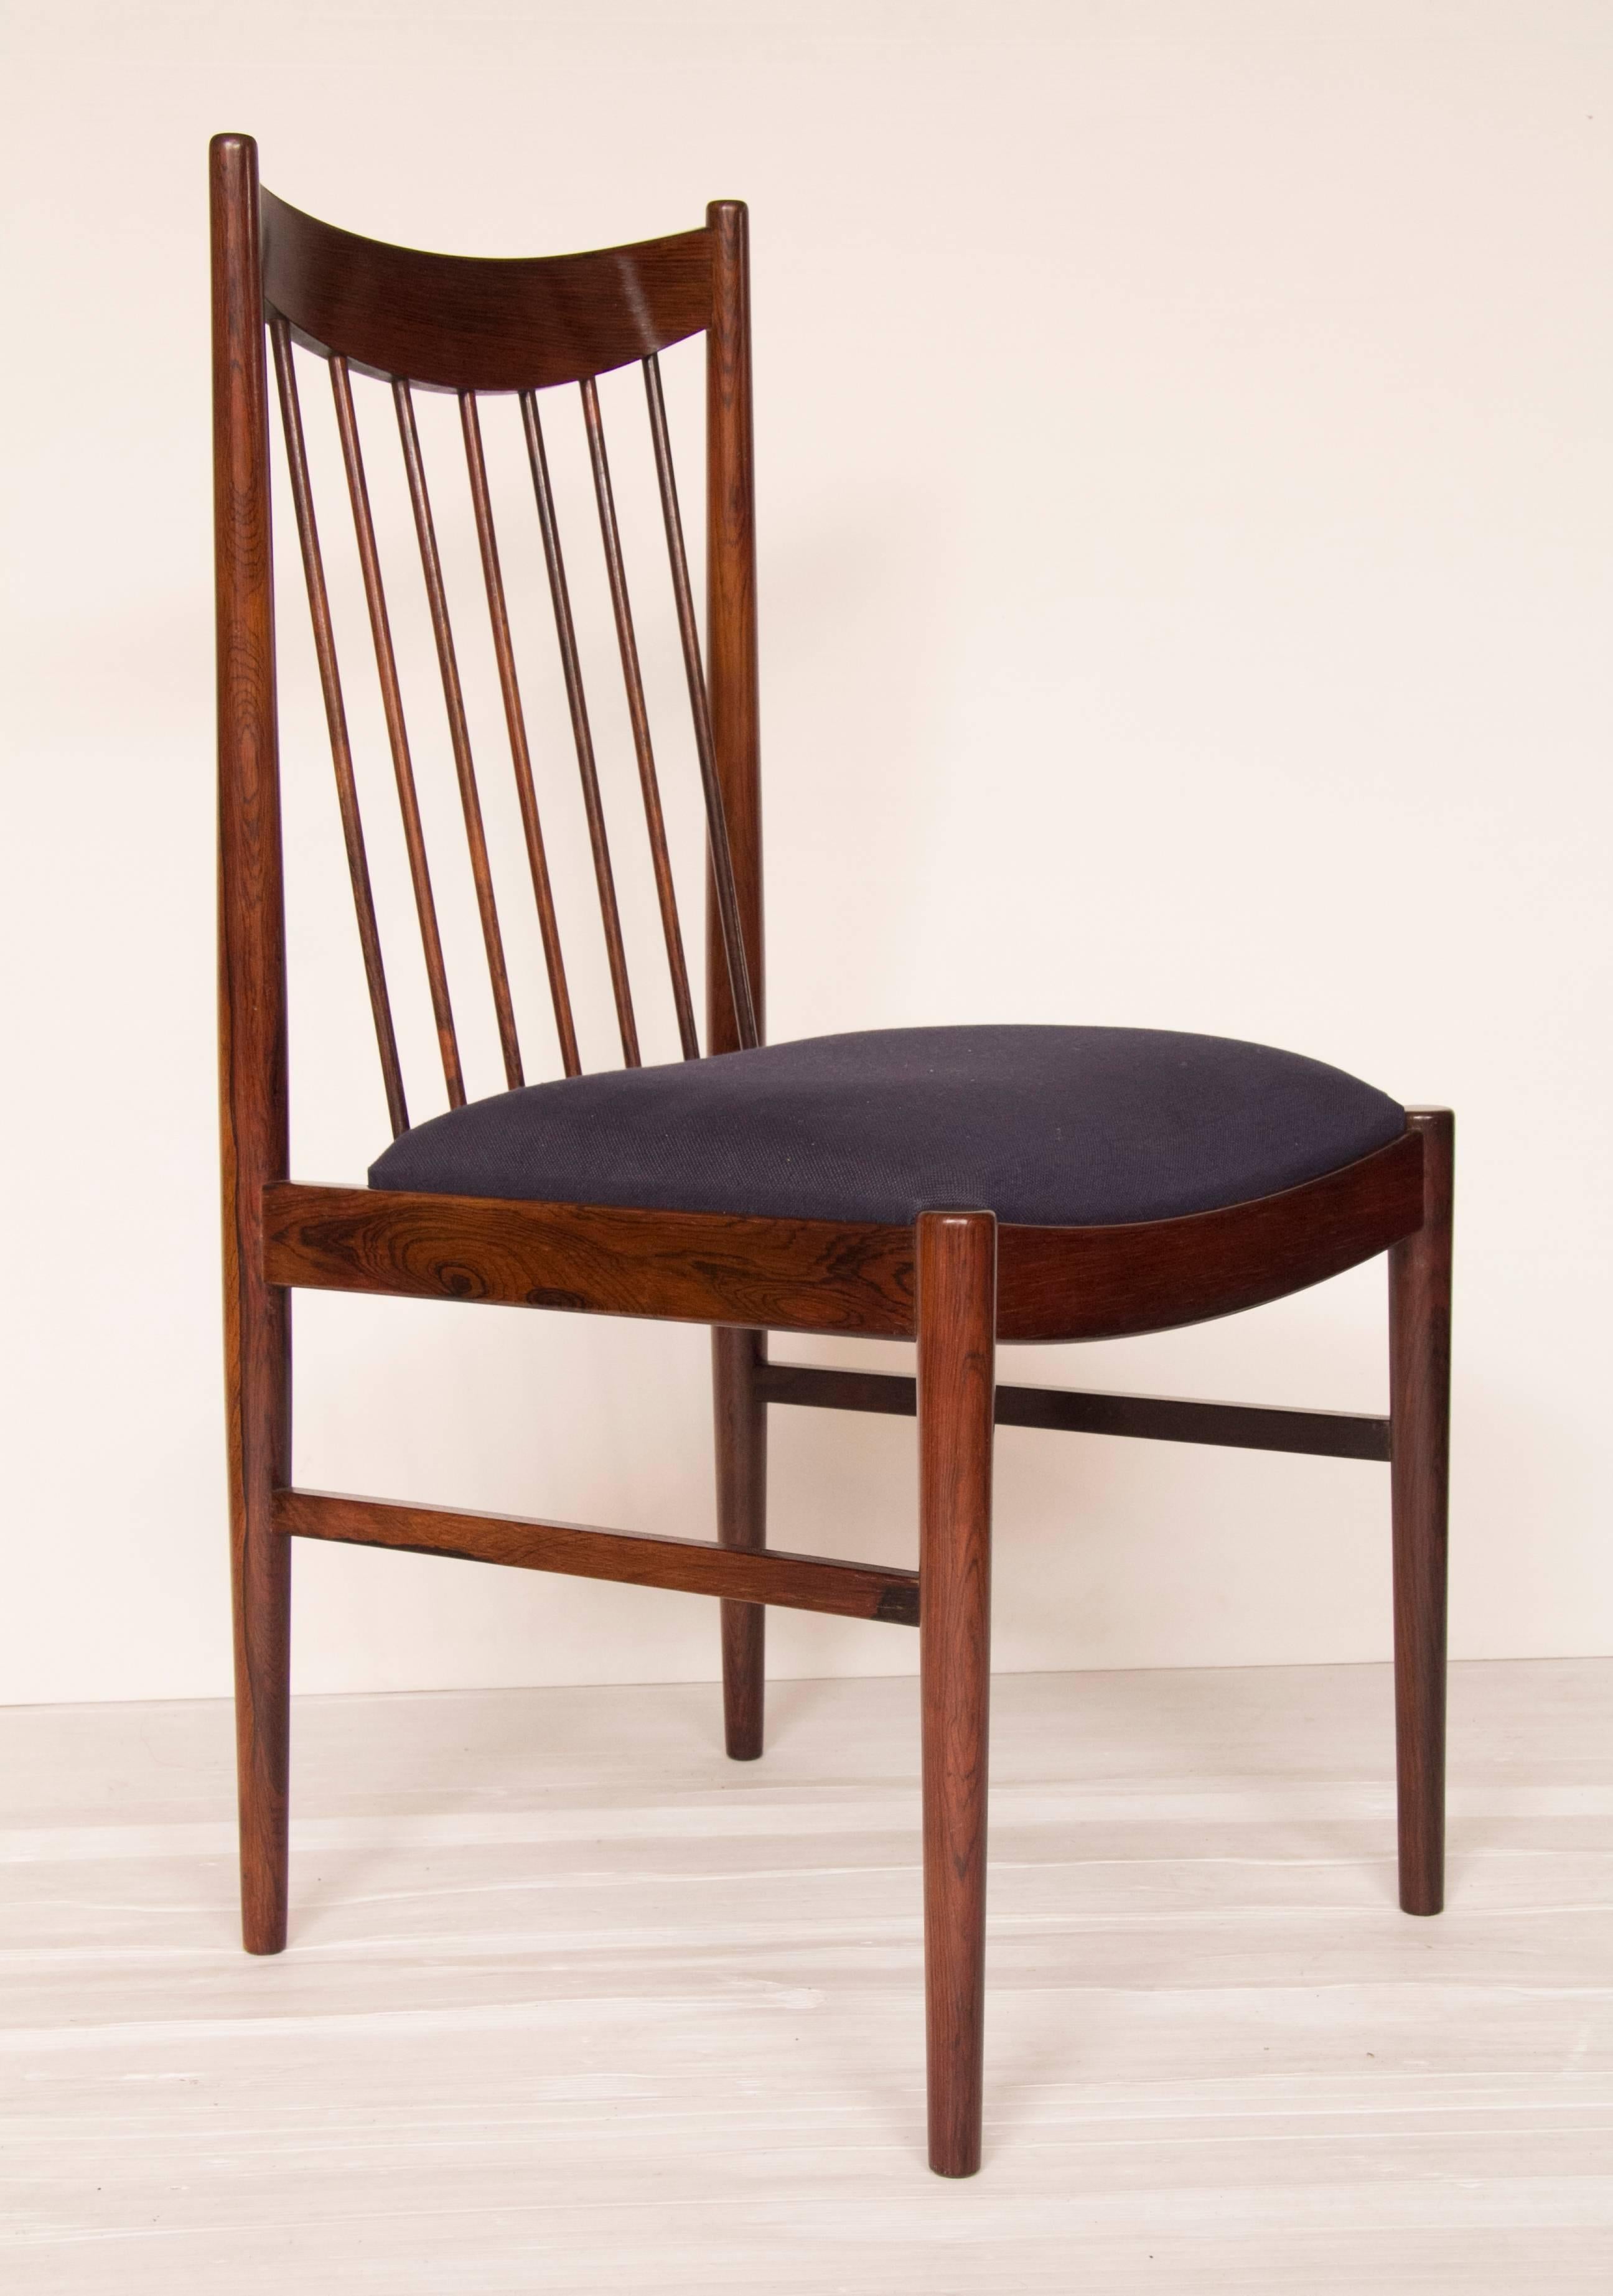 Set of six high back rosewood dining chairs designed by Arne Vodder for Sibast, newly upholstered in dark blue fabric.